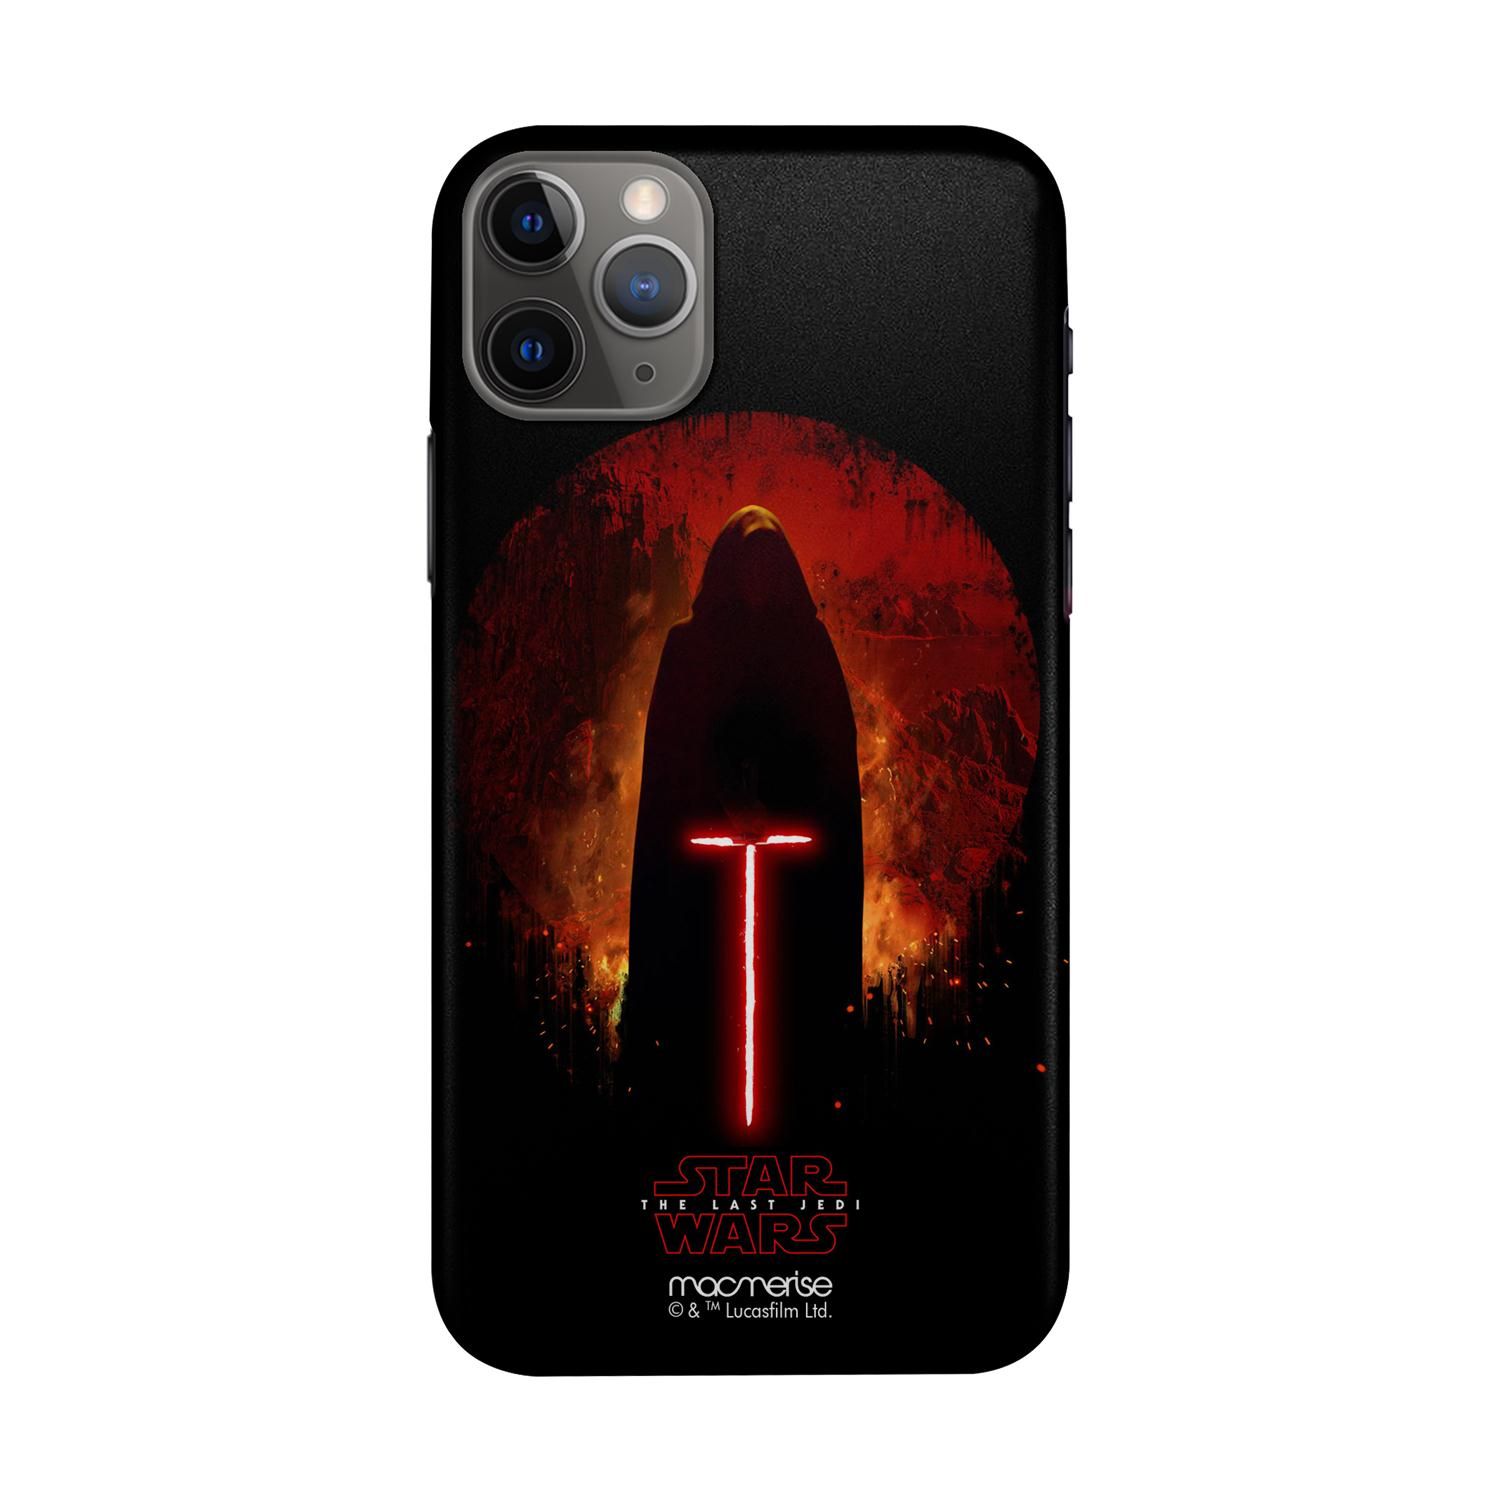 Buy Embrace The Darkness Within - Sleek Phone Case for iPhone 11 Pro Max Online